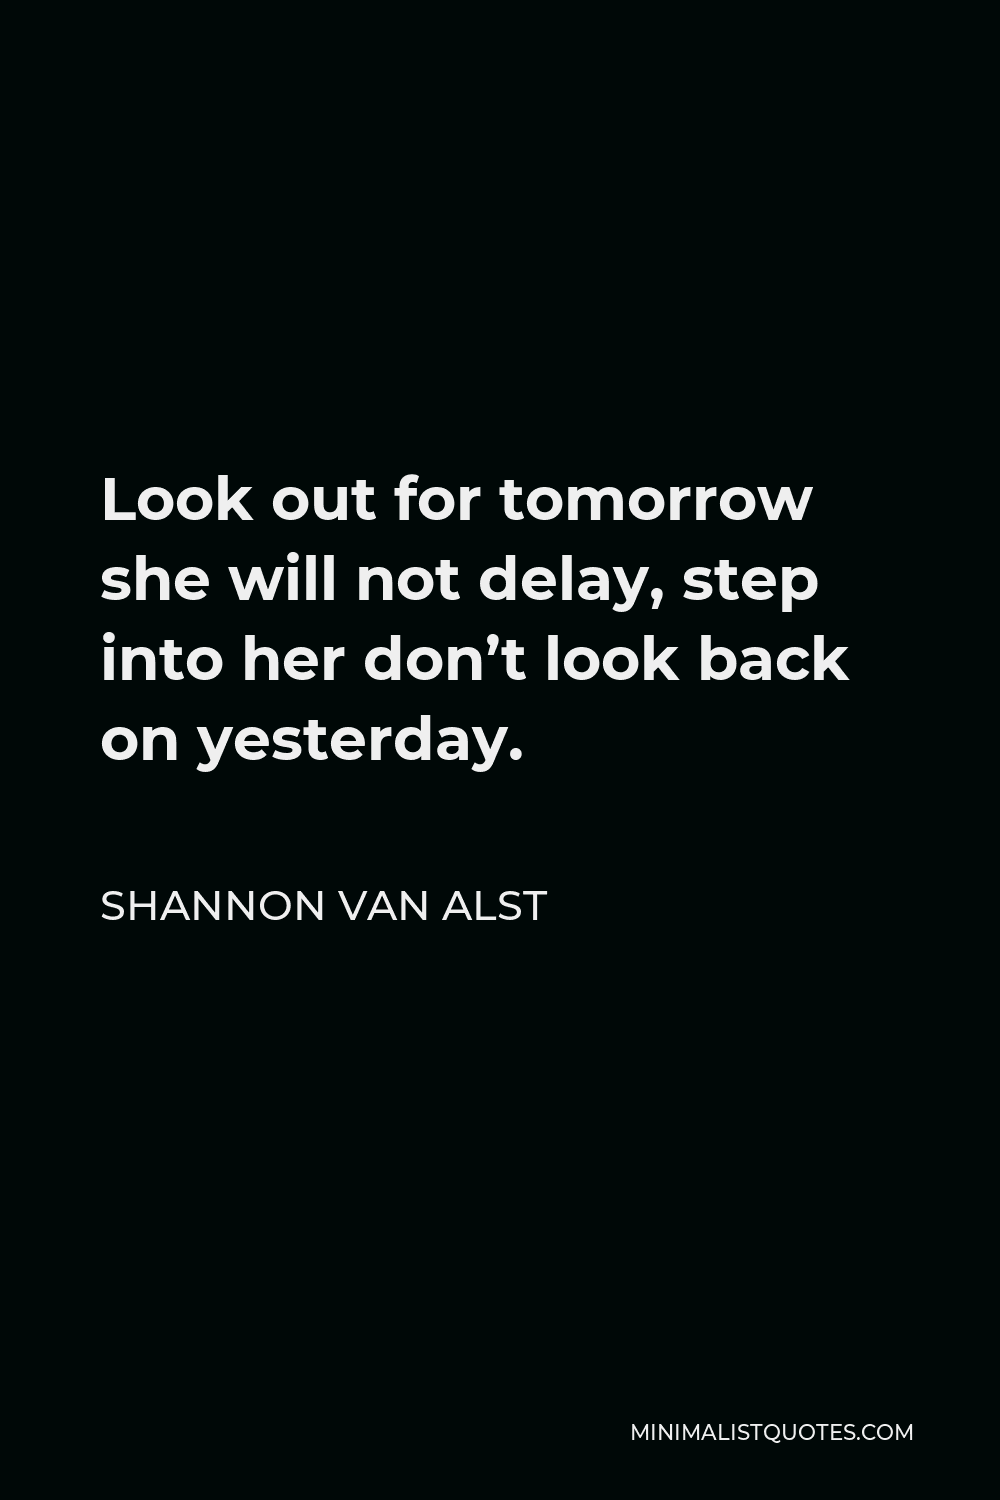 Shannon Van Alst Quote - Look out for tomorrow she will not delay, step into her don’t look back on yesterday.